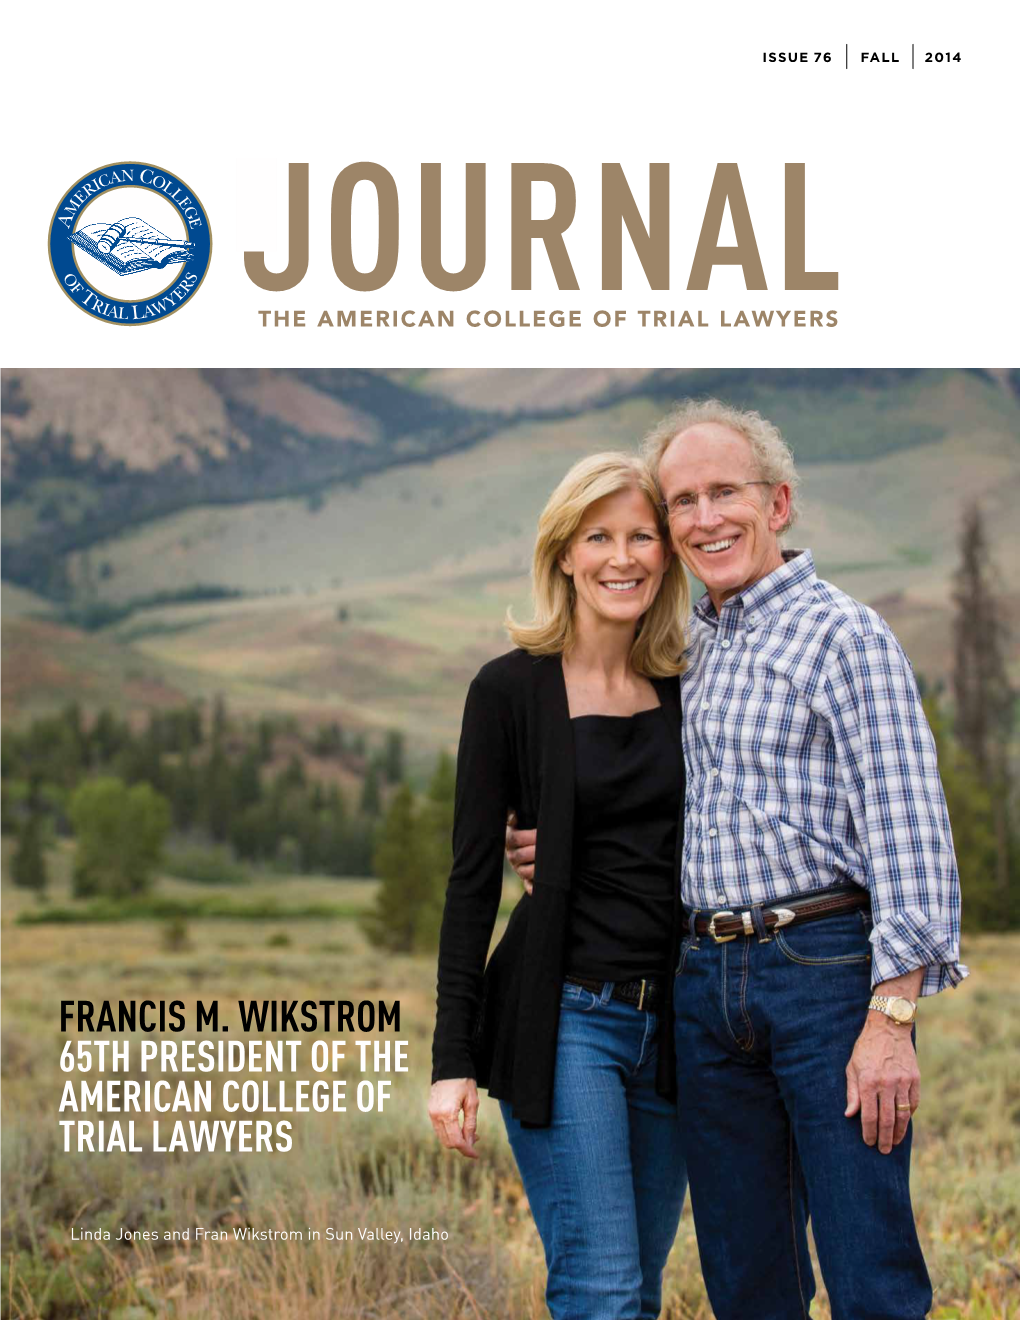 Francis M. Wikstrom 65Th President of the American College of Trial Lawyers